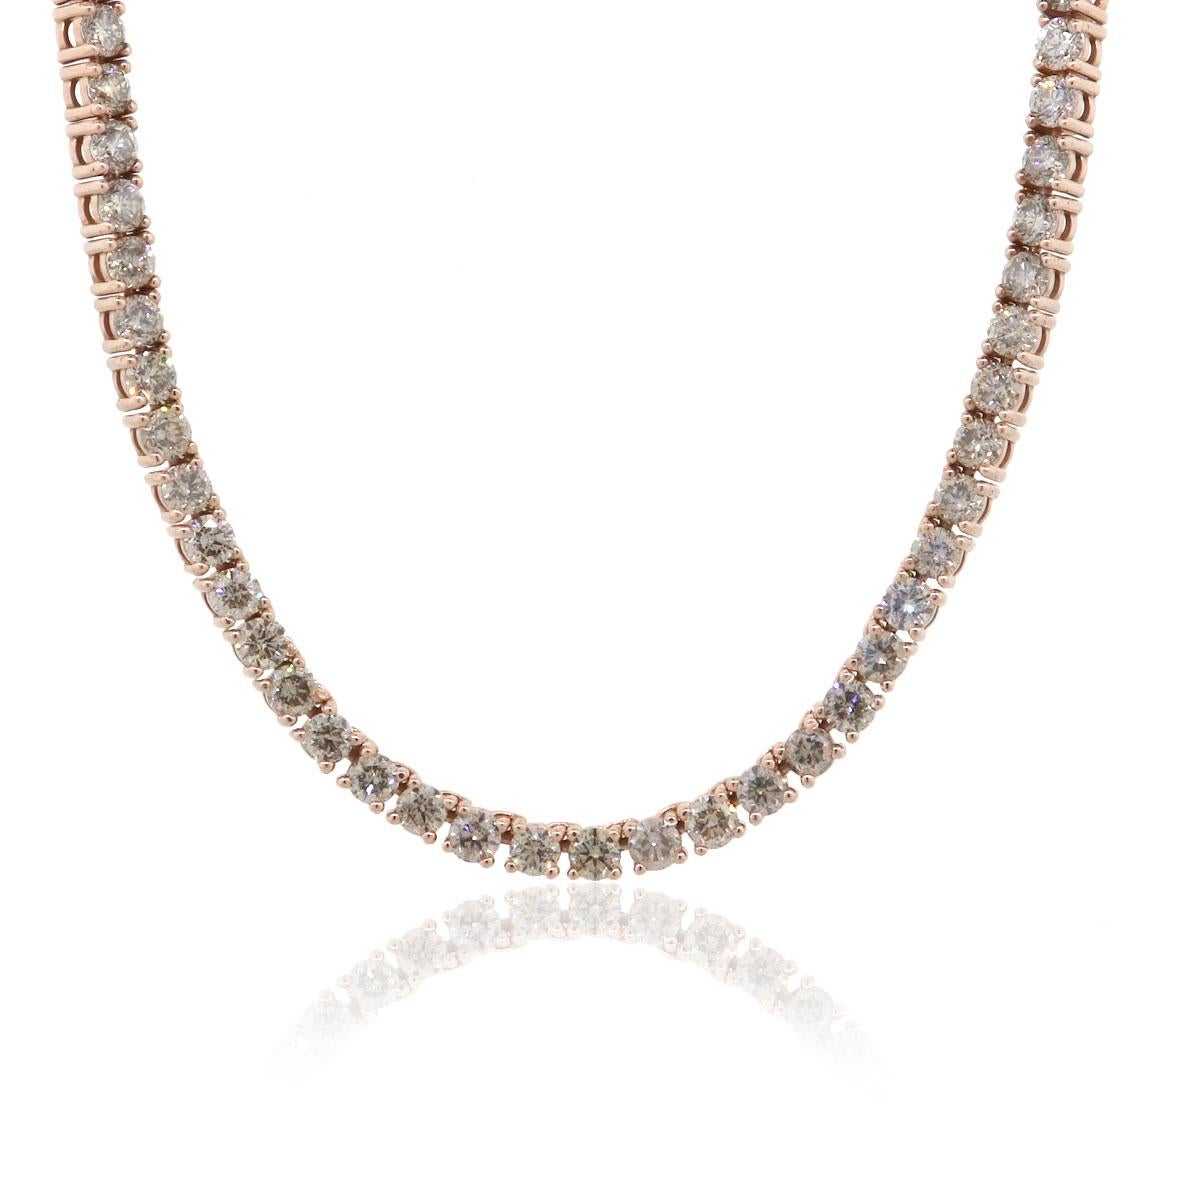 Material: 14k Rose Gold
Diamond Details: Approx. 54.15ctw of round cut diamonds. Diamonds are L/M in color and SI in clarity
Measurements: Necklace measures 27″ in length.
Fastening: Tongue in box clasp with safety latch
Item Weight: 46.4g